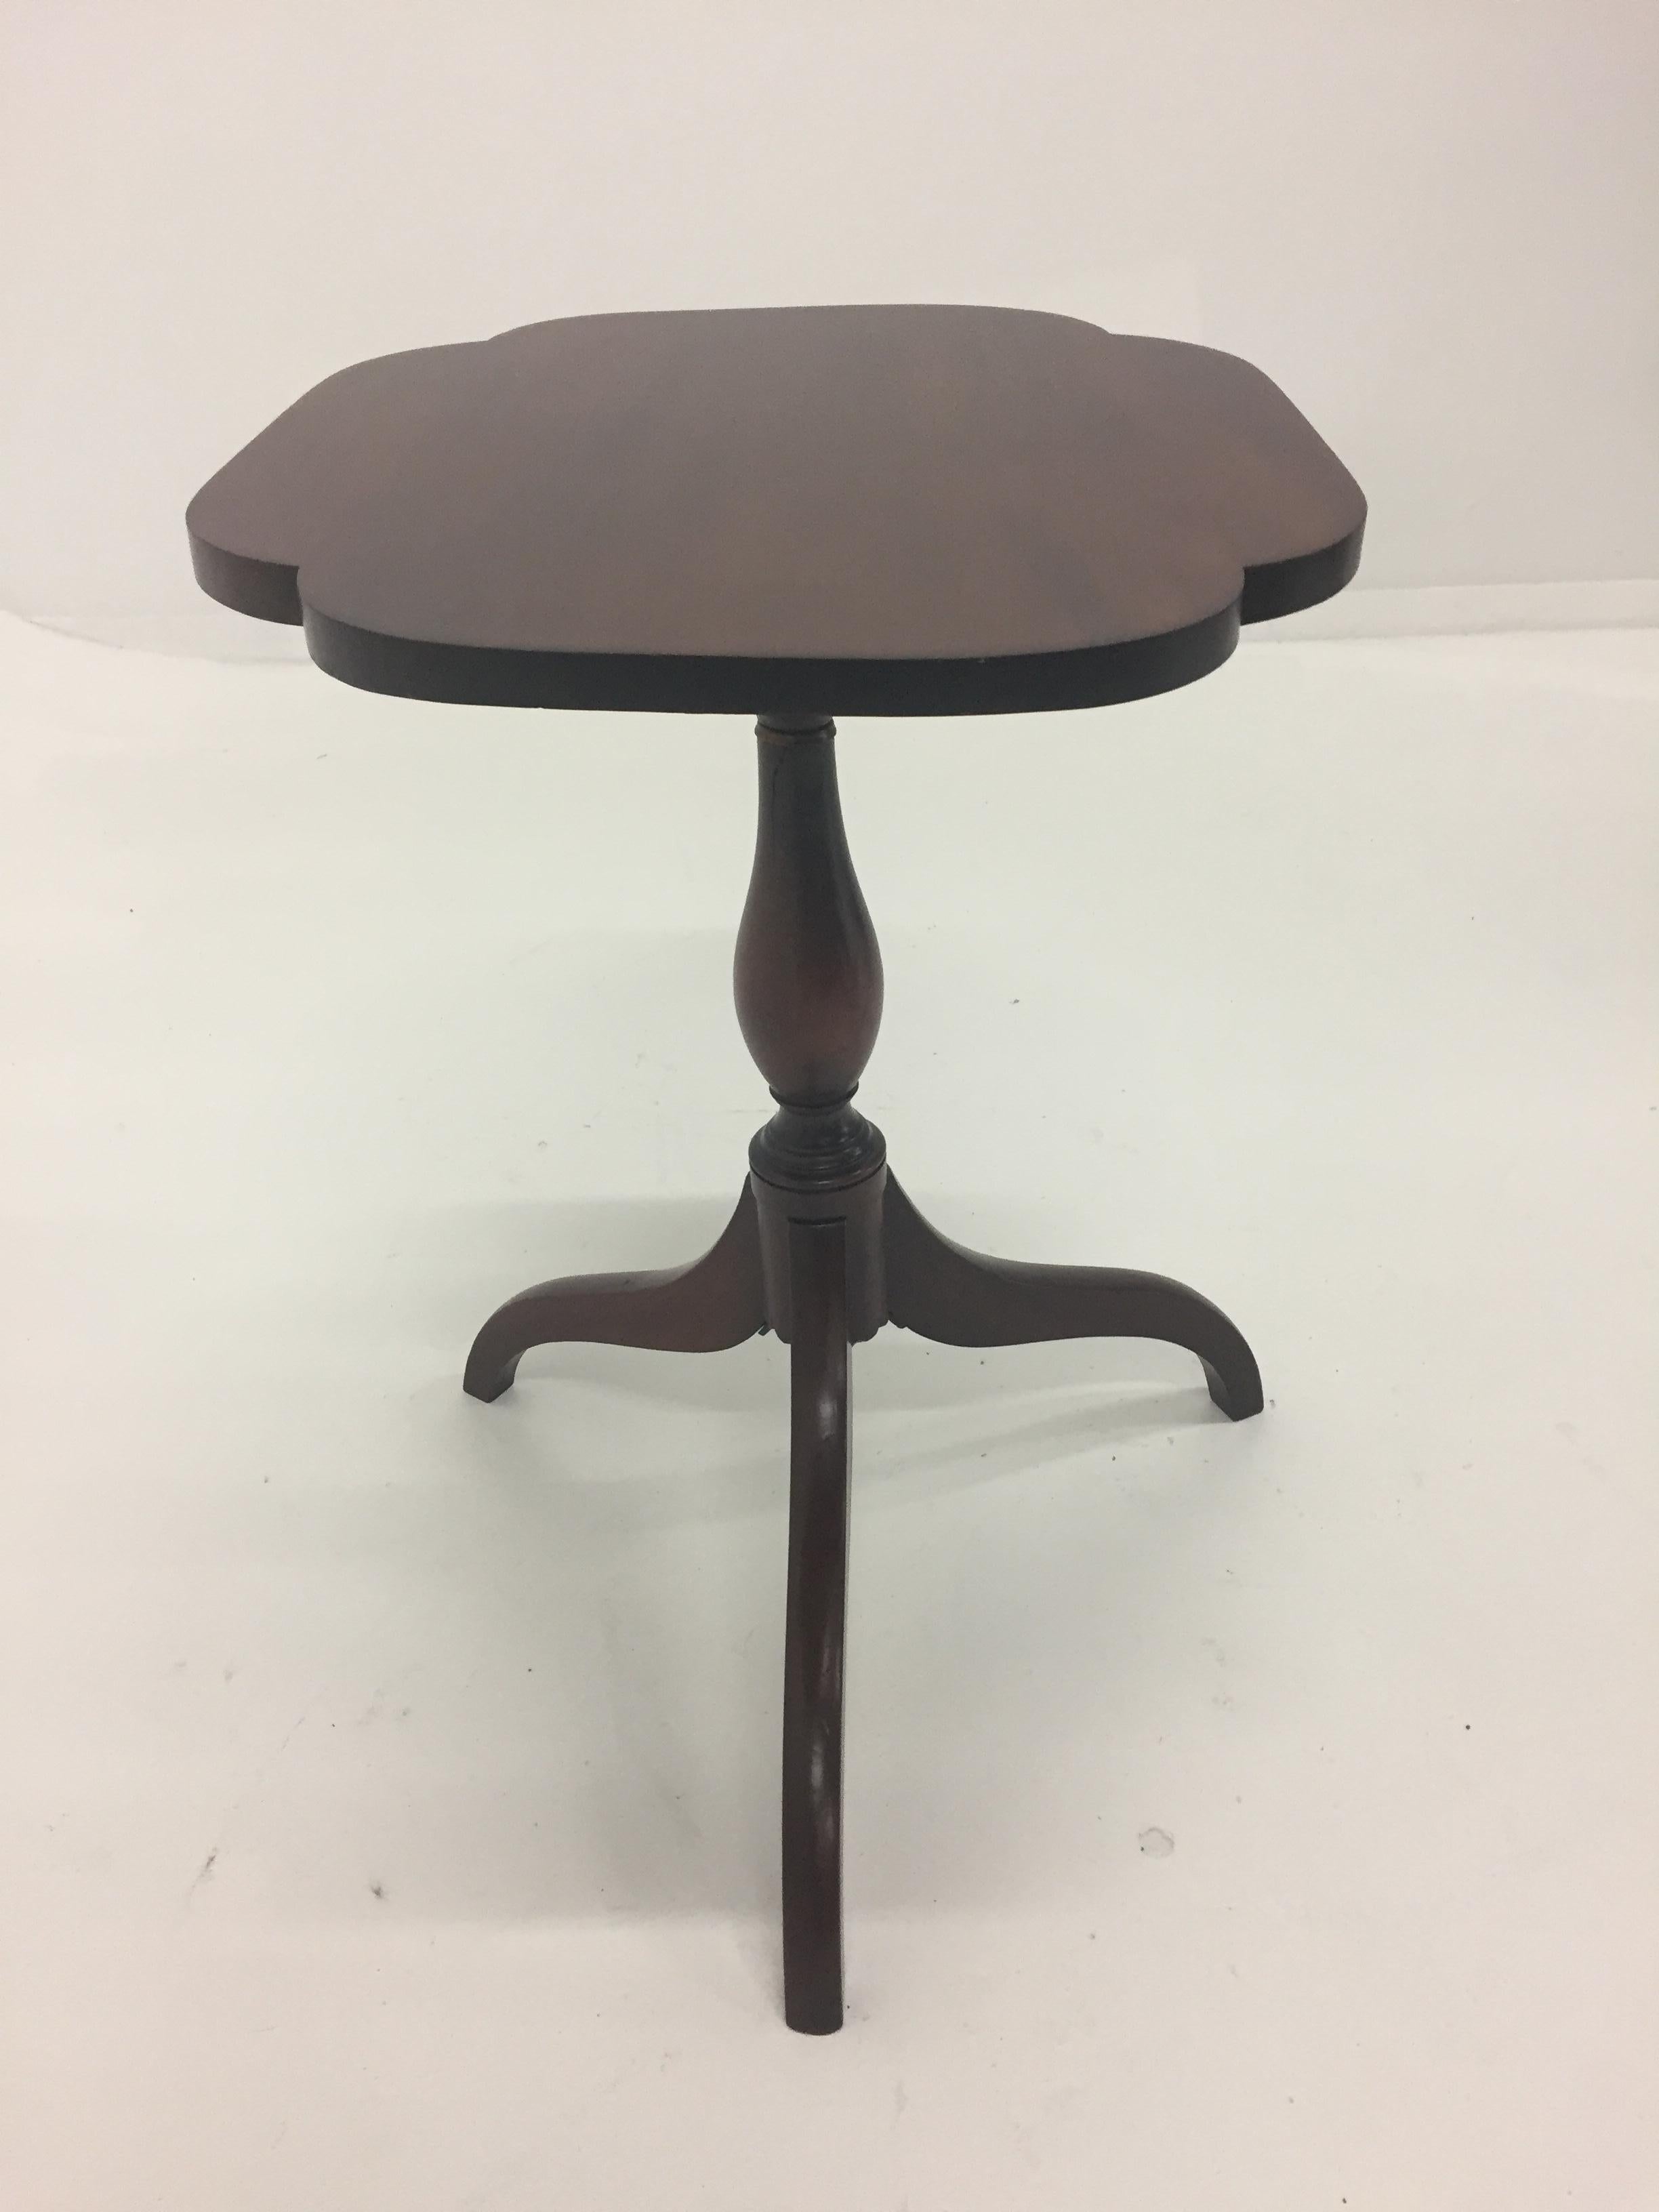 Lovely classic English mahogany tilt top side table having a pretty scalloped top and elegant column base with tripod legs.
When top is tilted up measures 36 H.